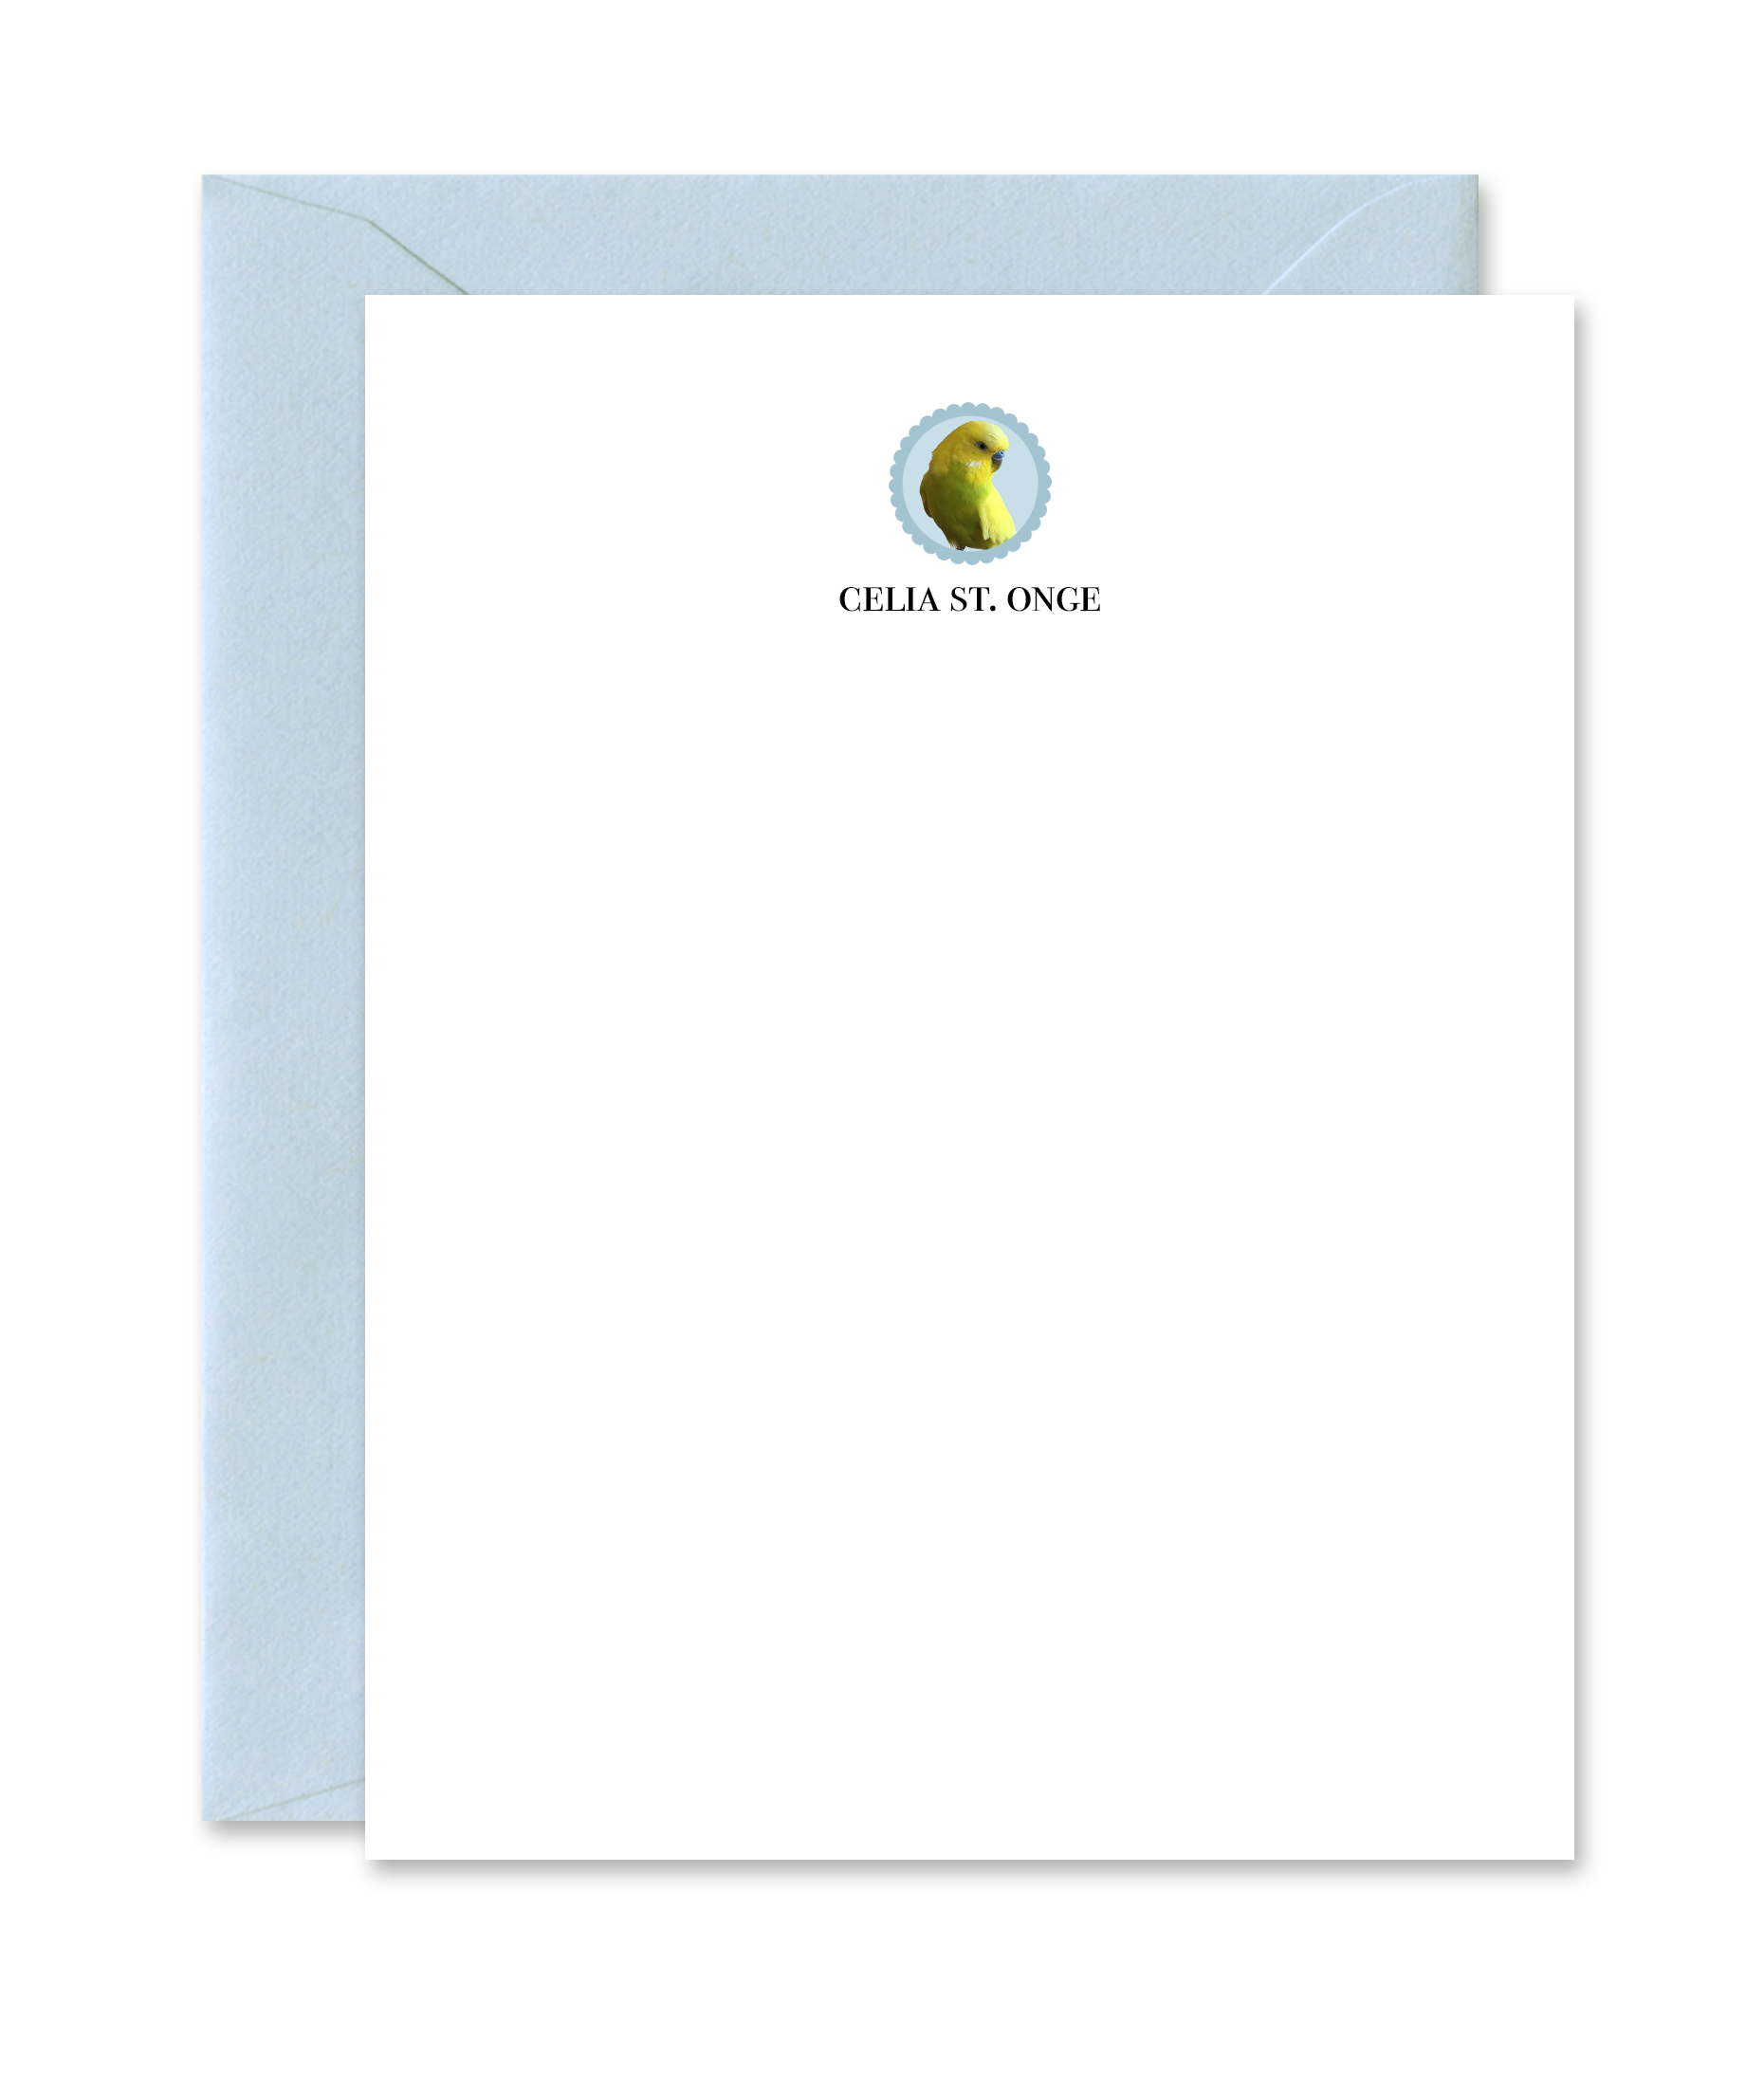 2018 Card.Envelope.RETAIL-Recovered.png